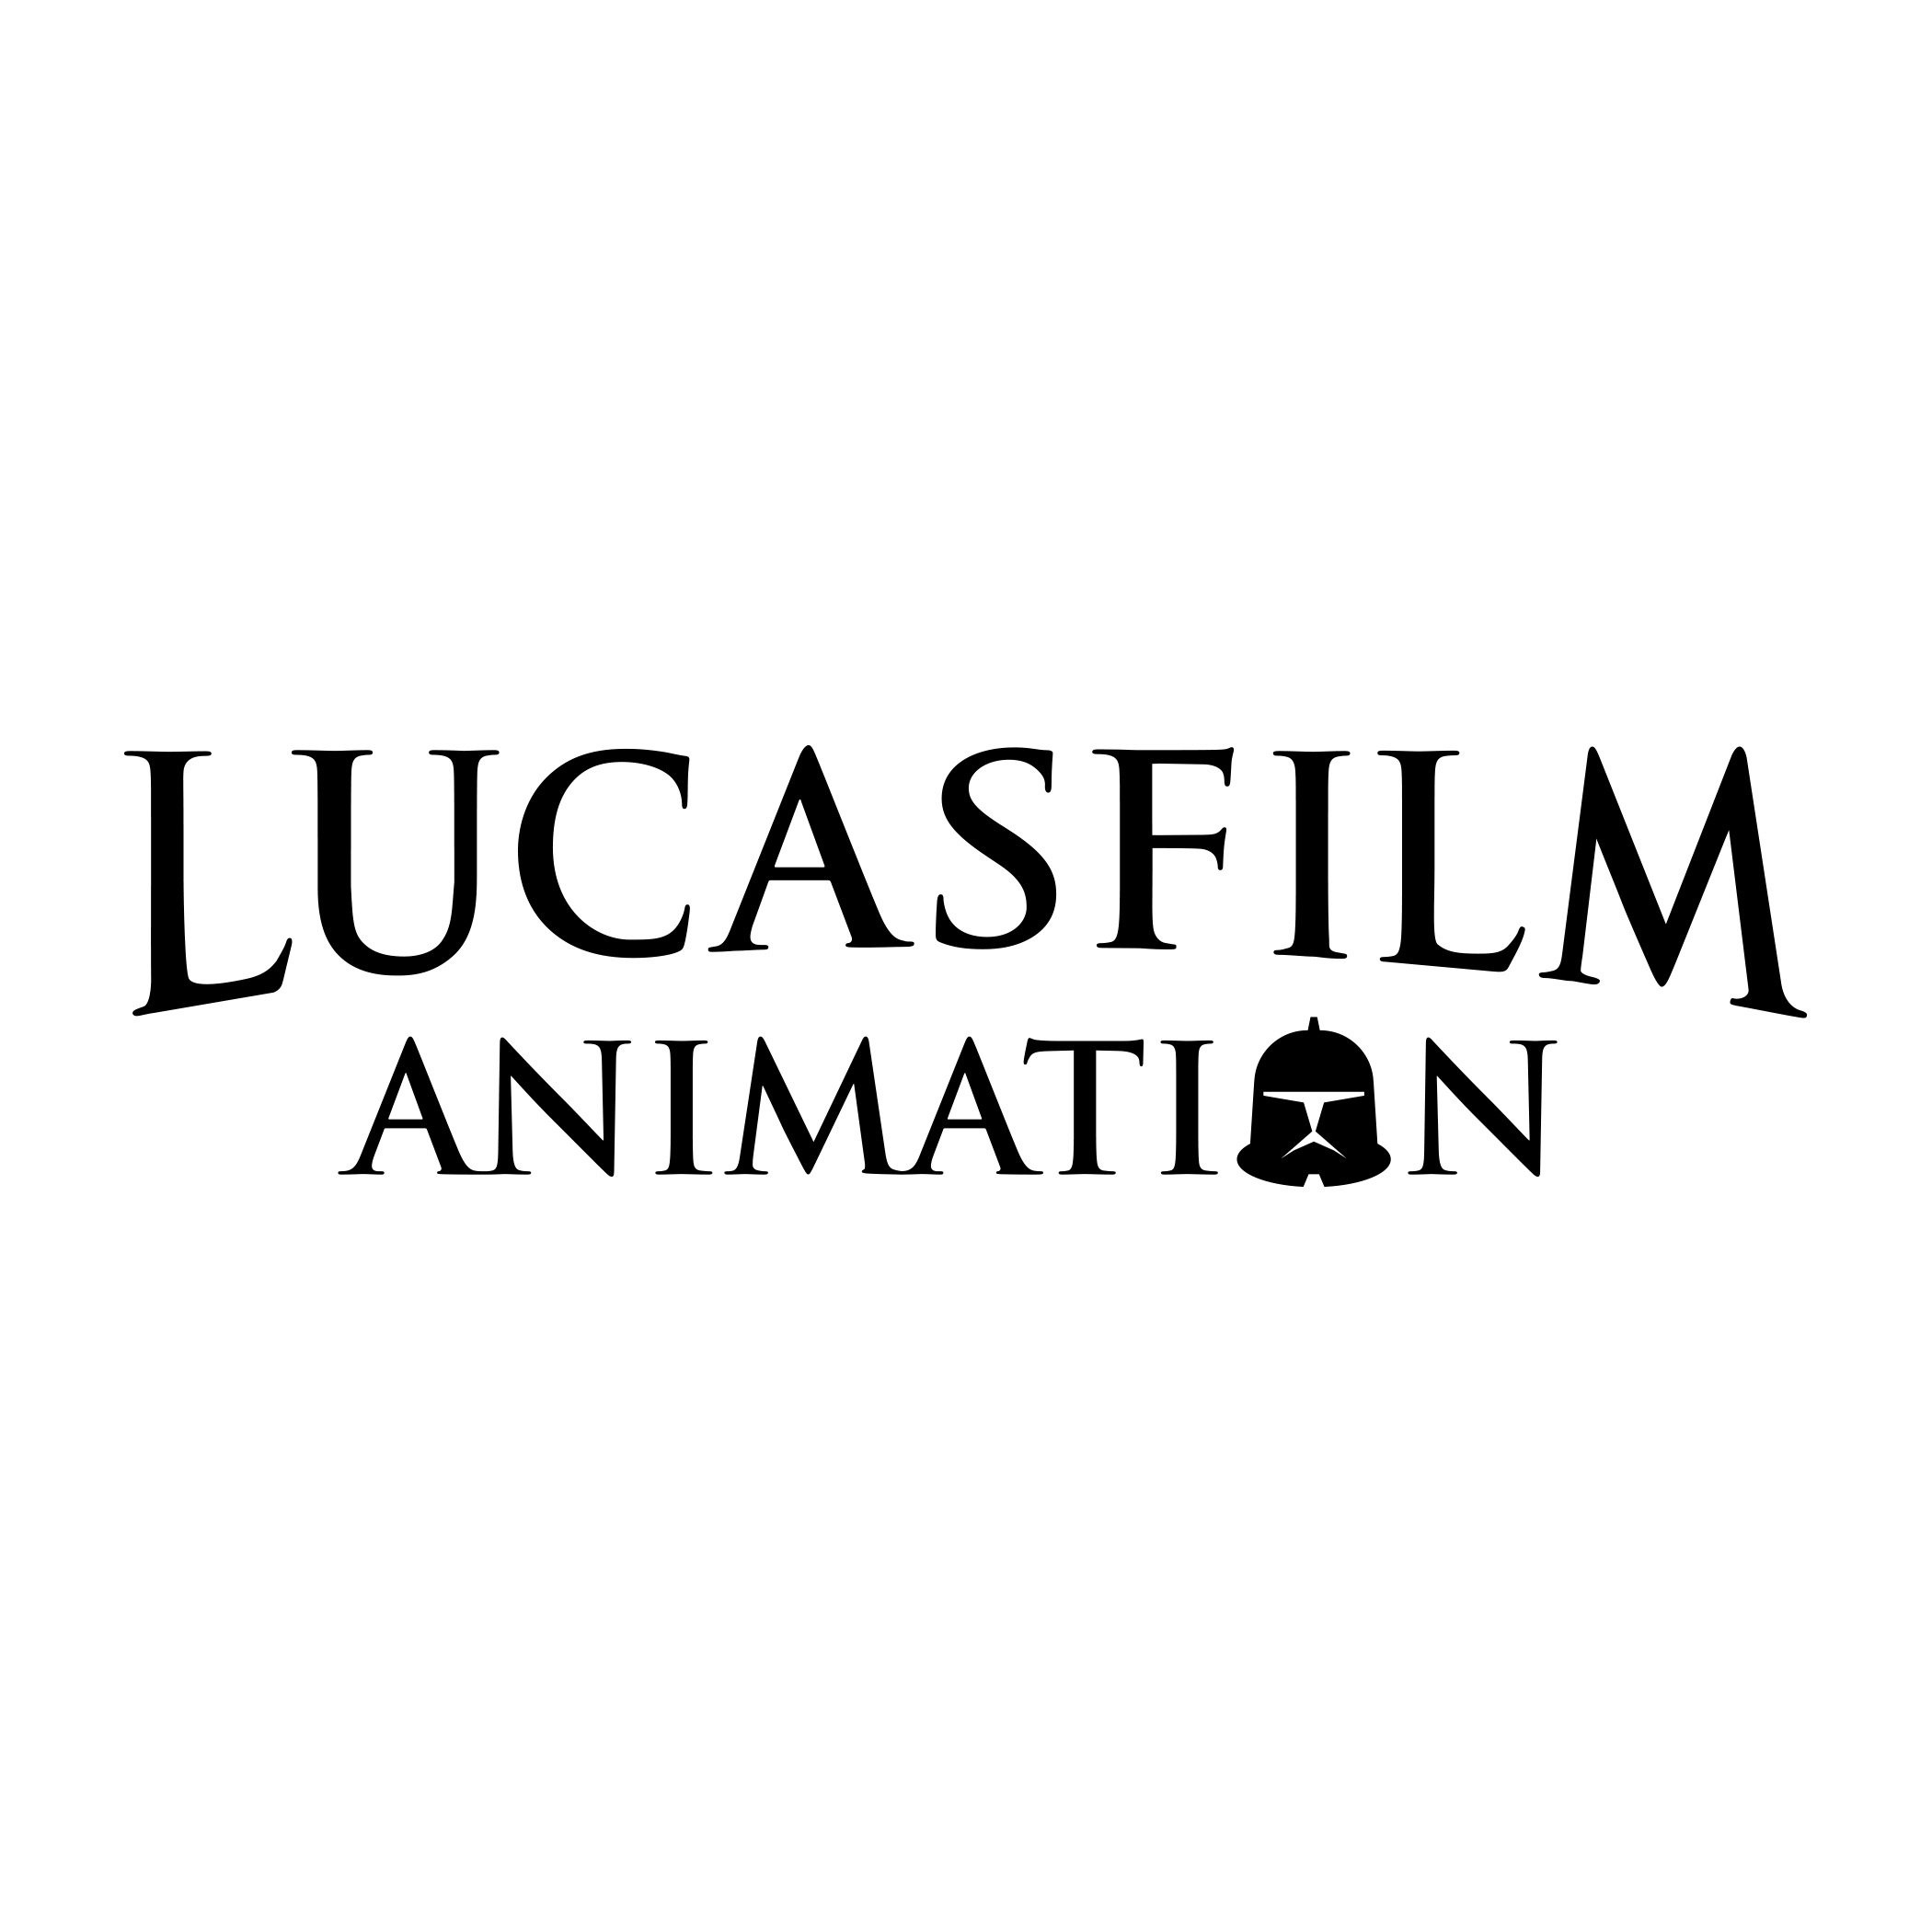 image of the Lucasfilm Animation logo